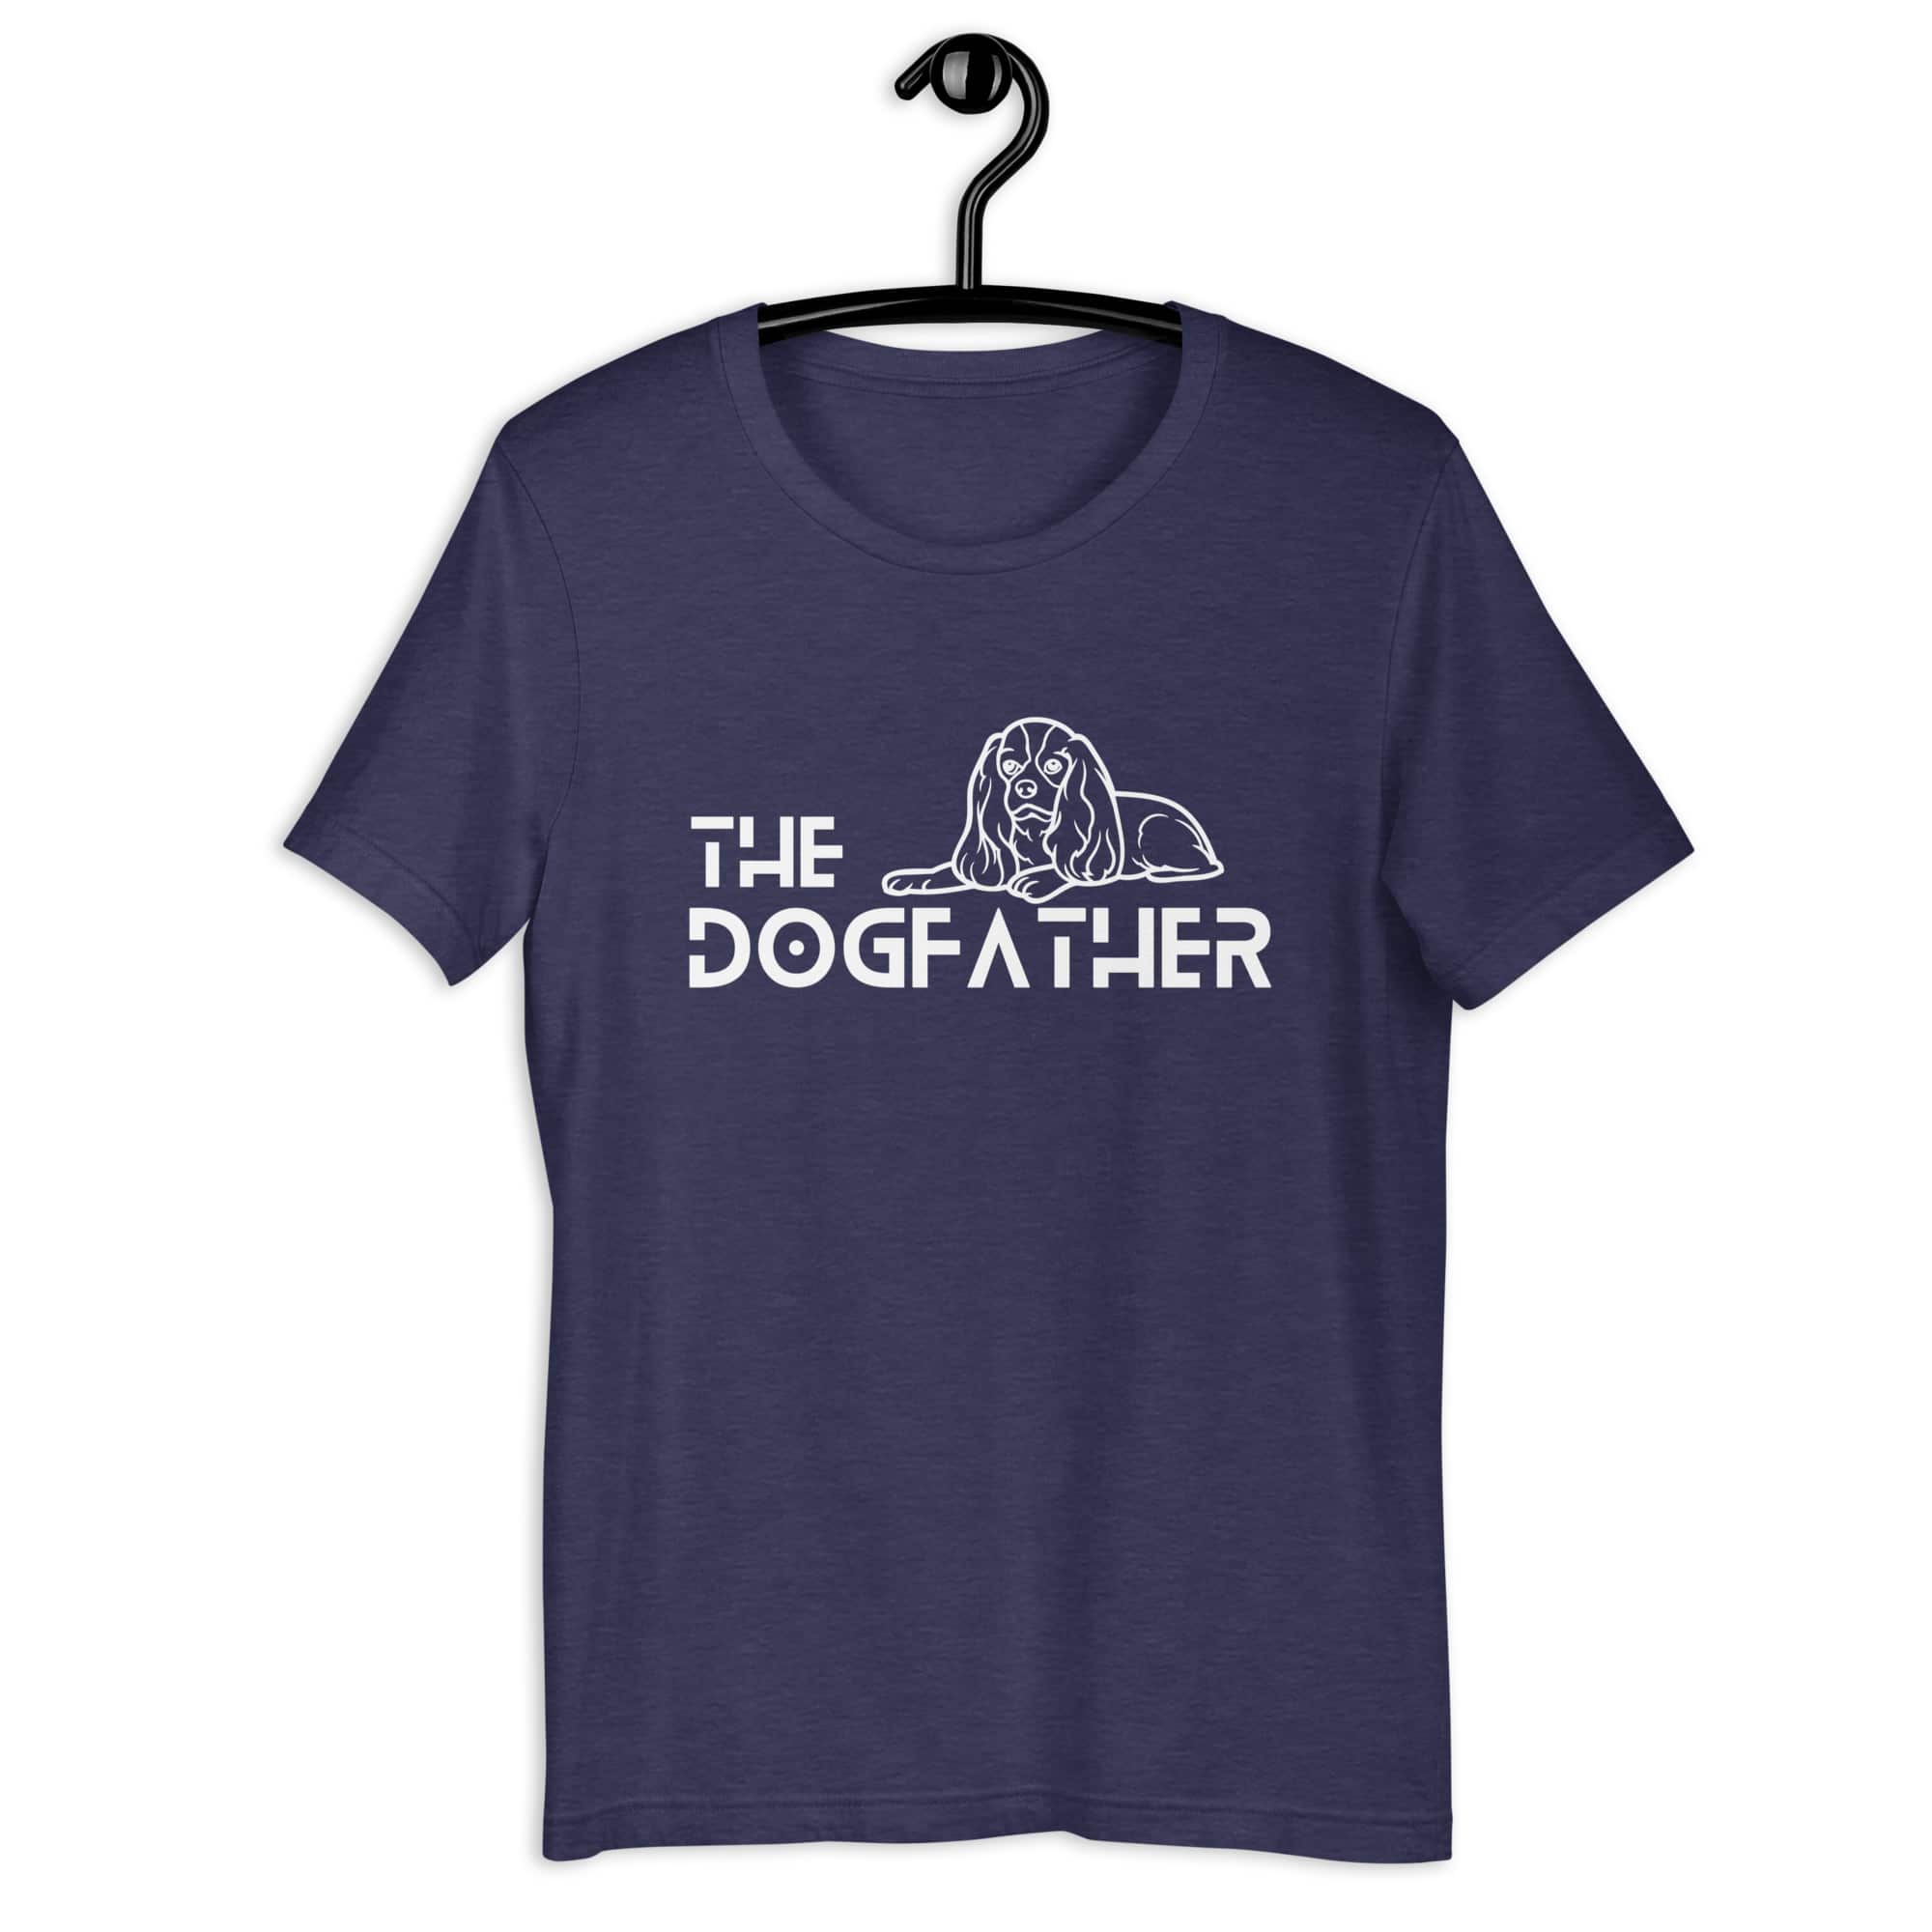 The Dogfather Hounds Unisex T-Shirt. Heather Midnight Navy